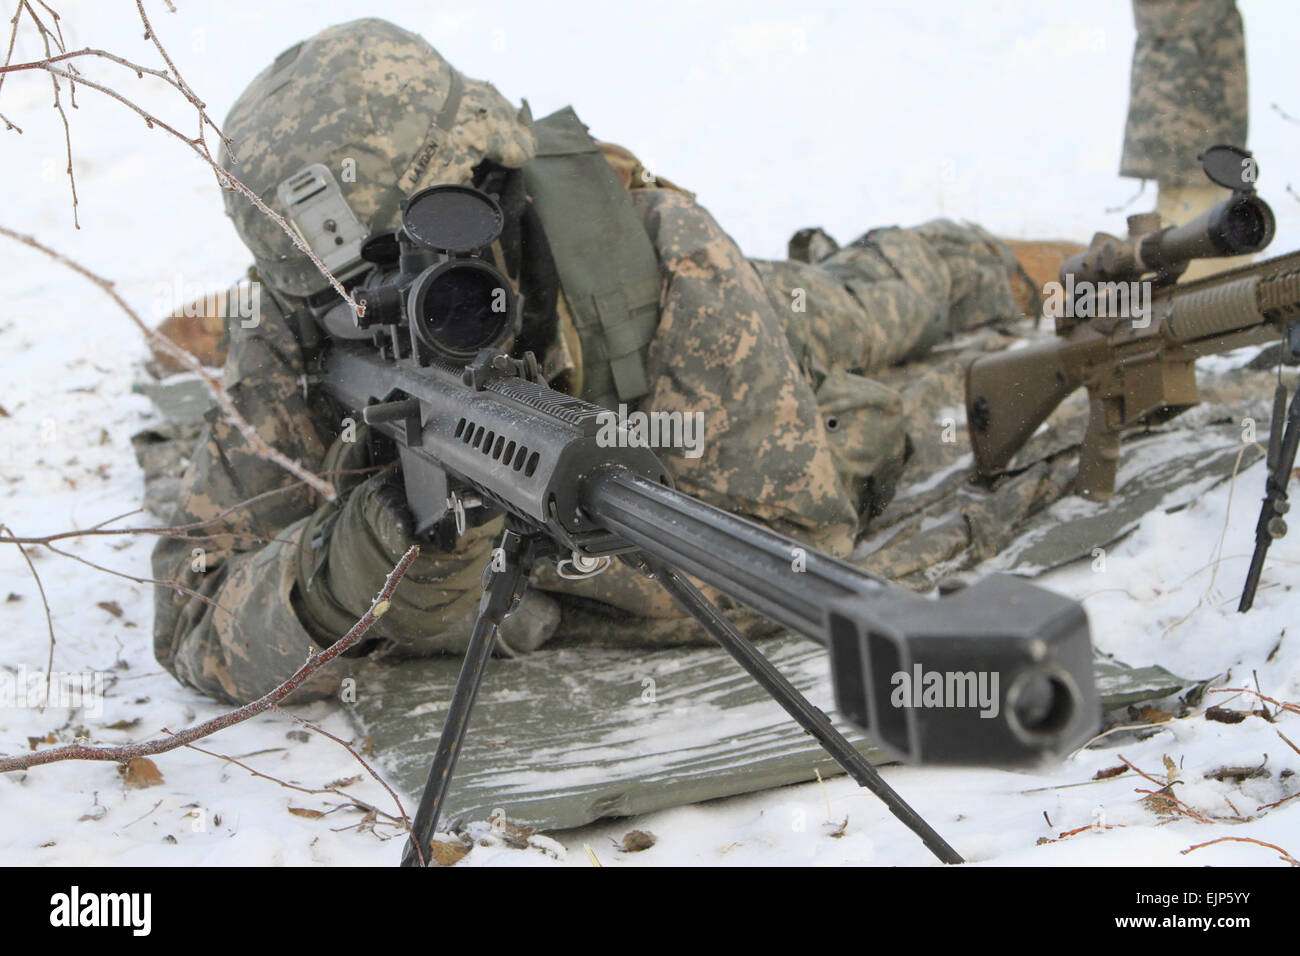 Army High Resolution Stock Photography Images - Alamy